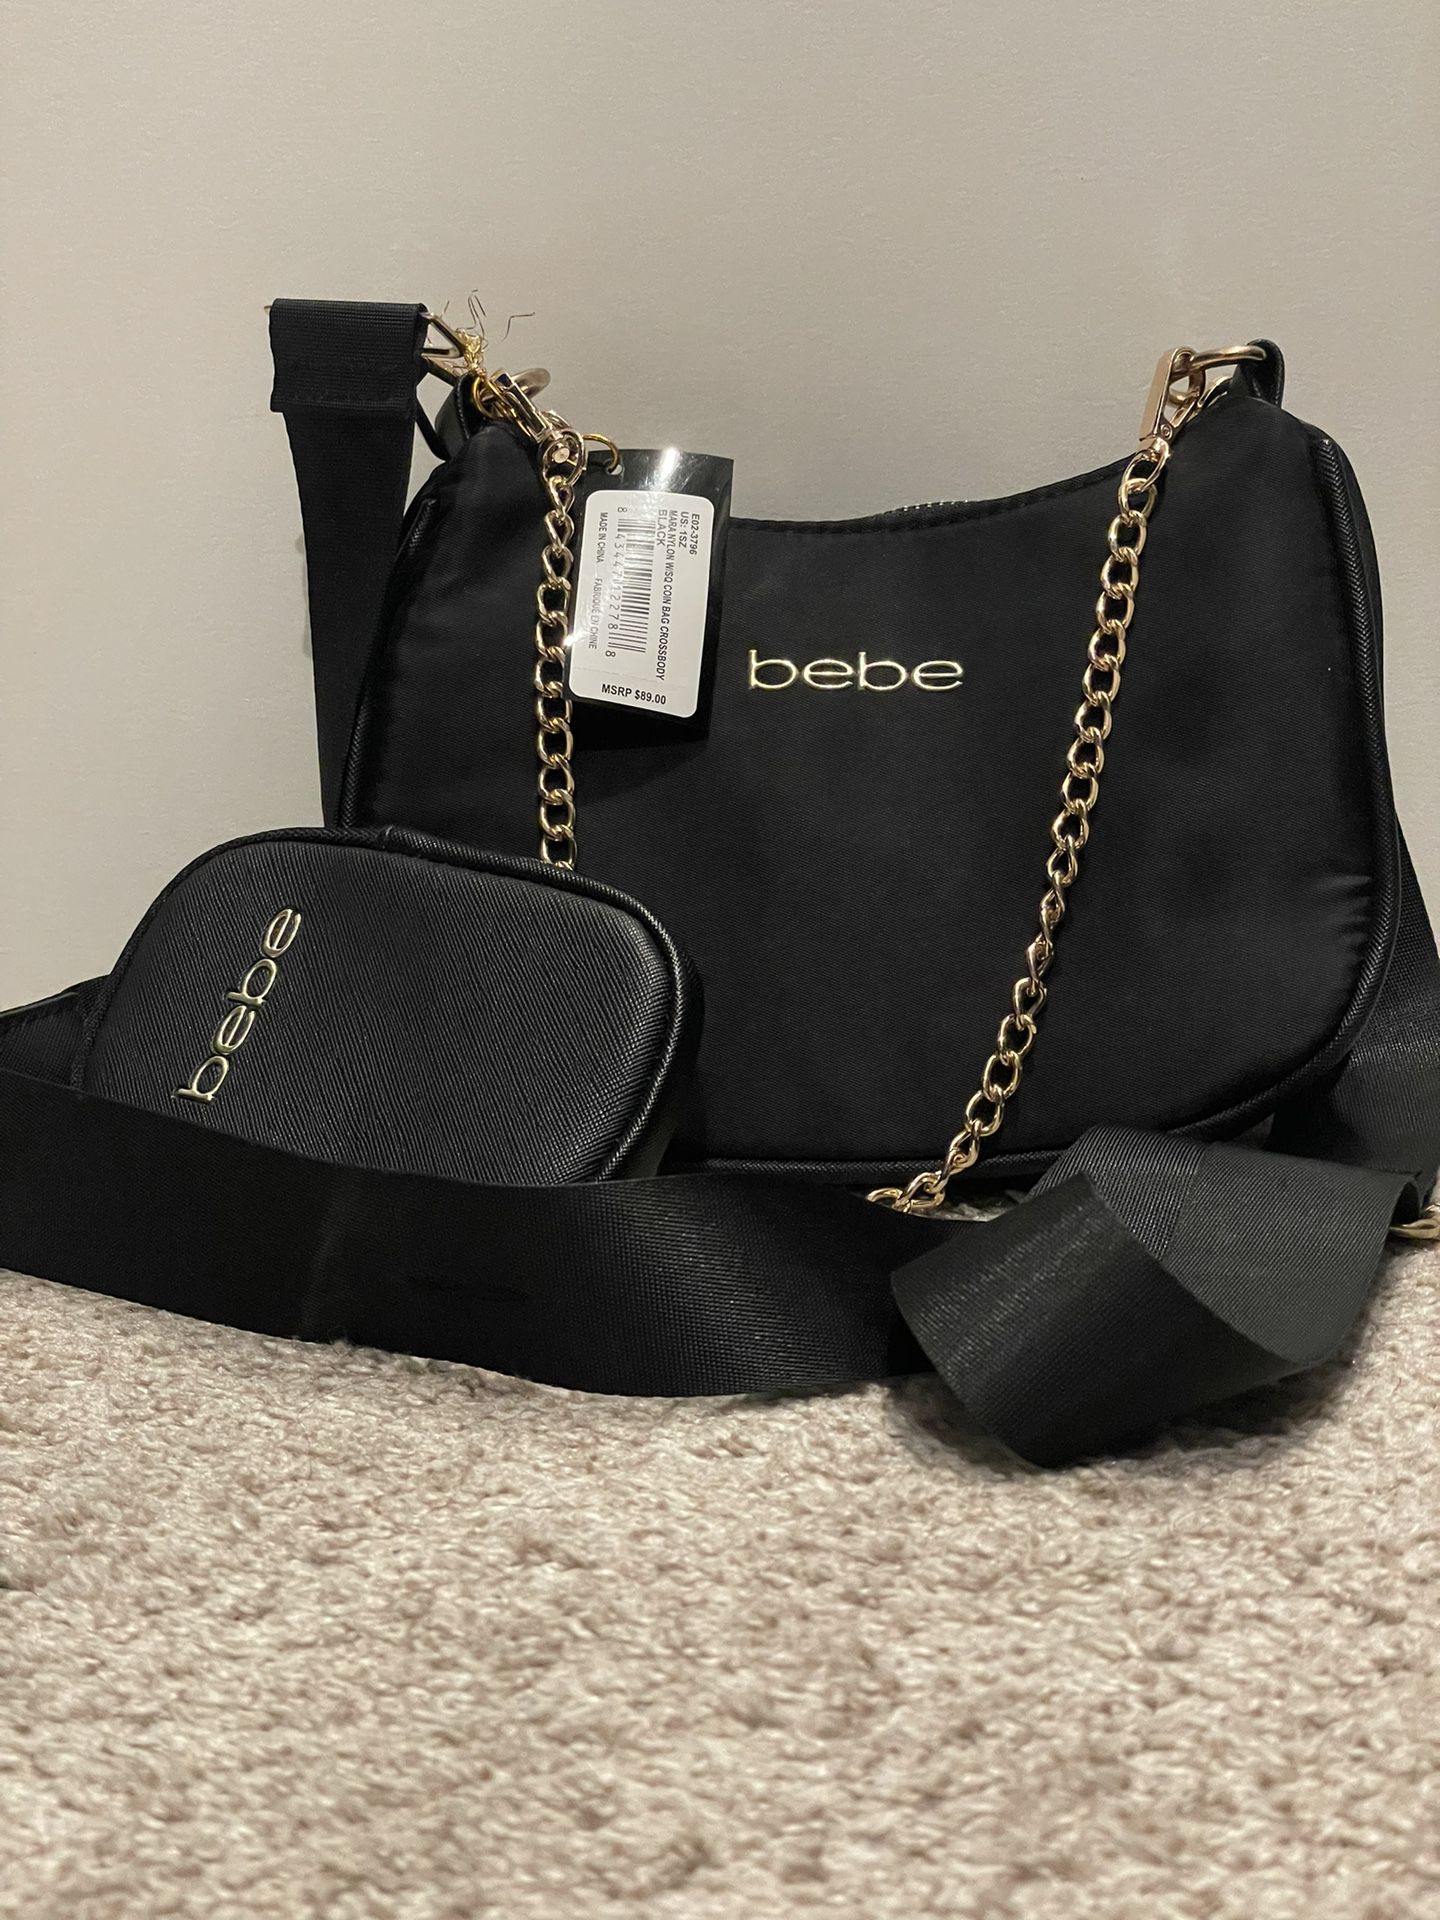 Brand New Bebe Nylon Crossbody With Coin Purse for Sale in Newark, CA -  OfferUp